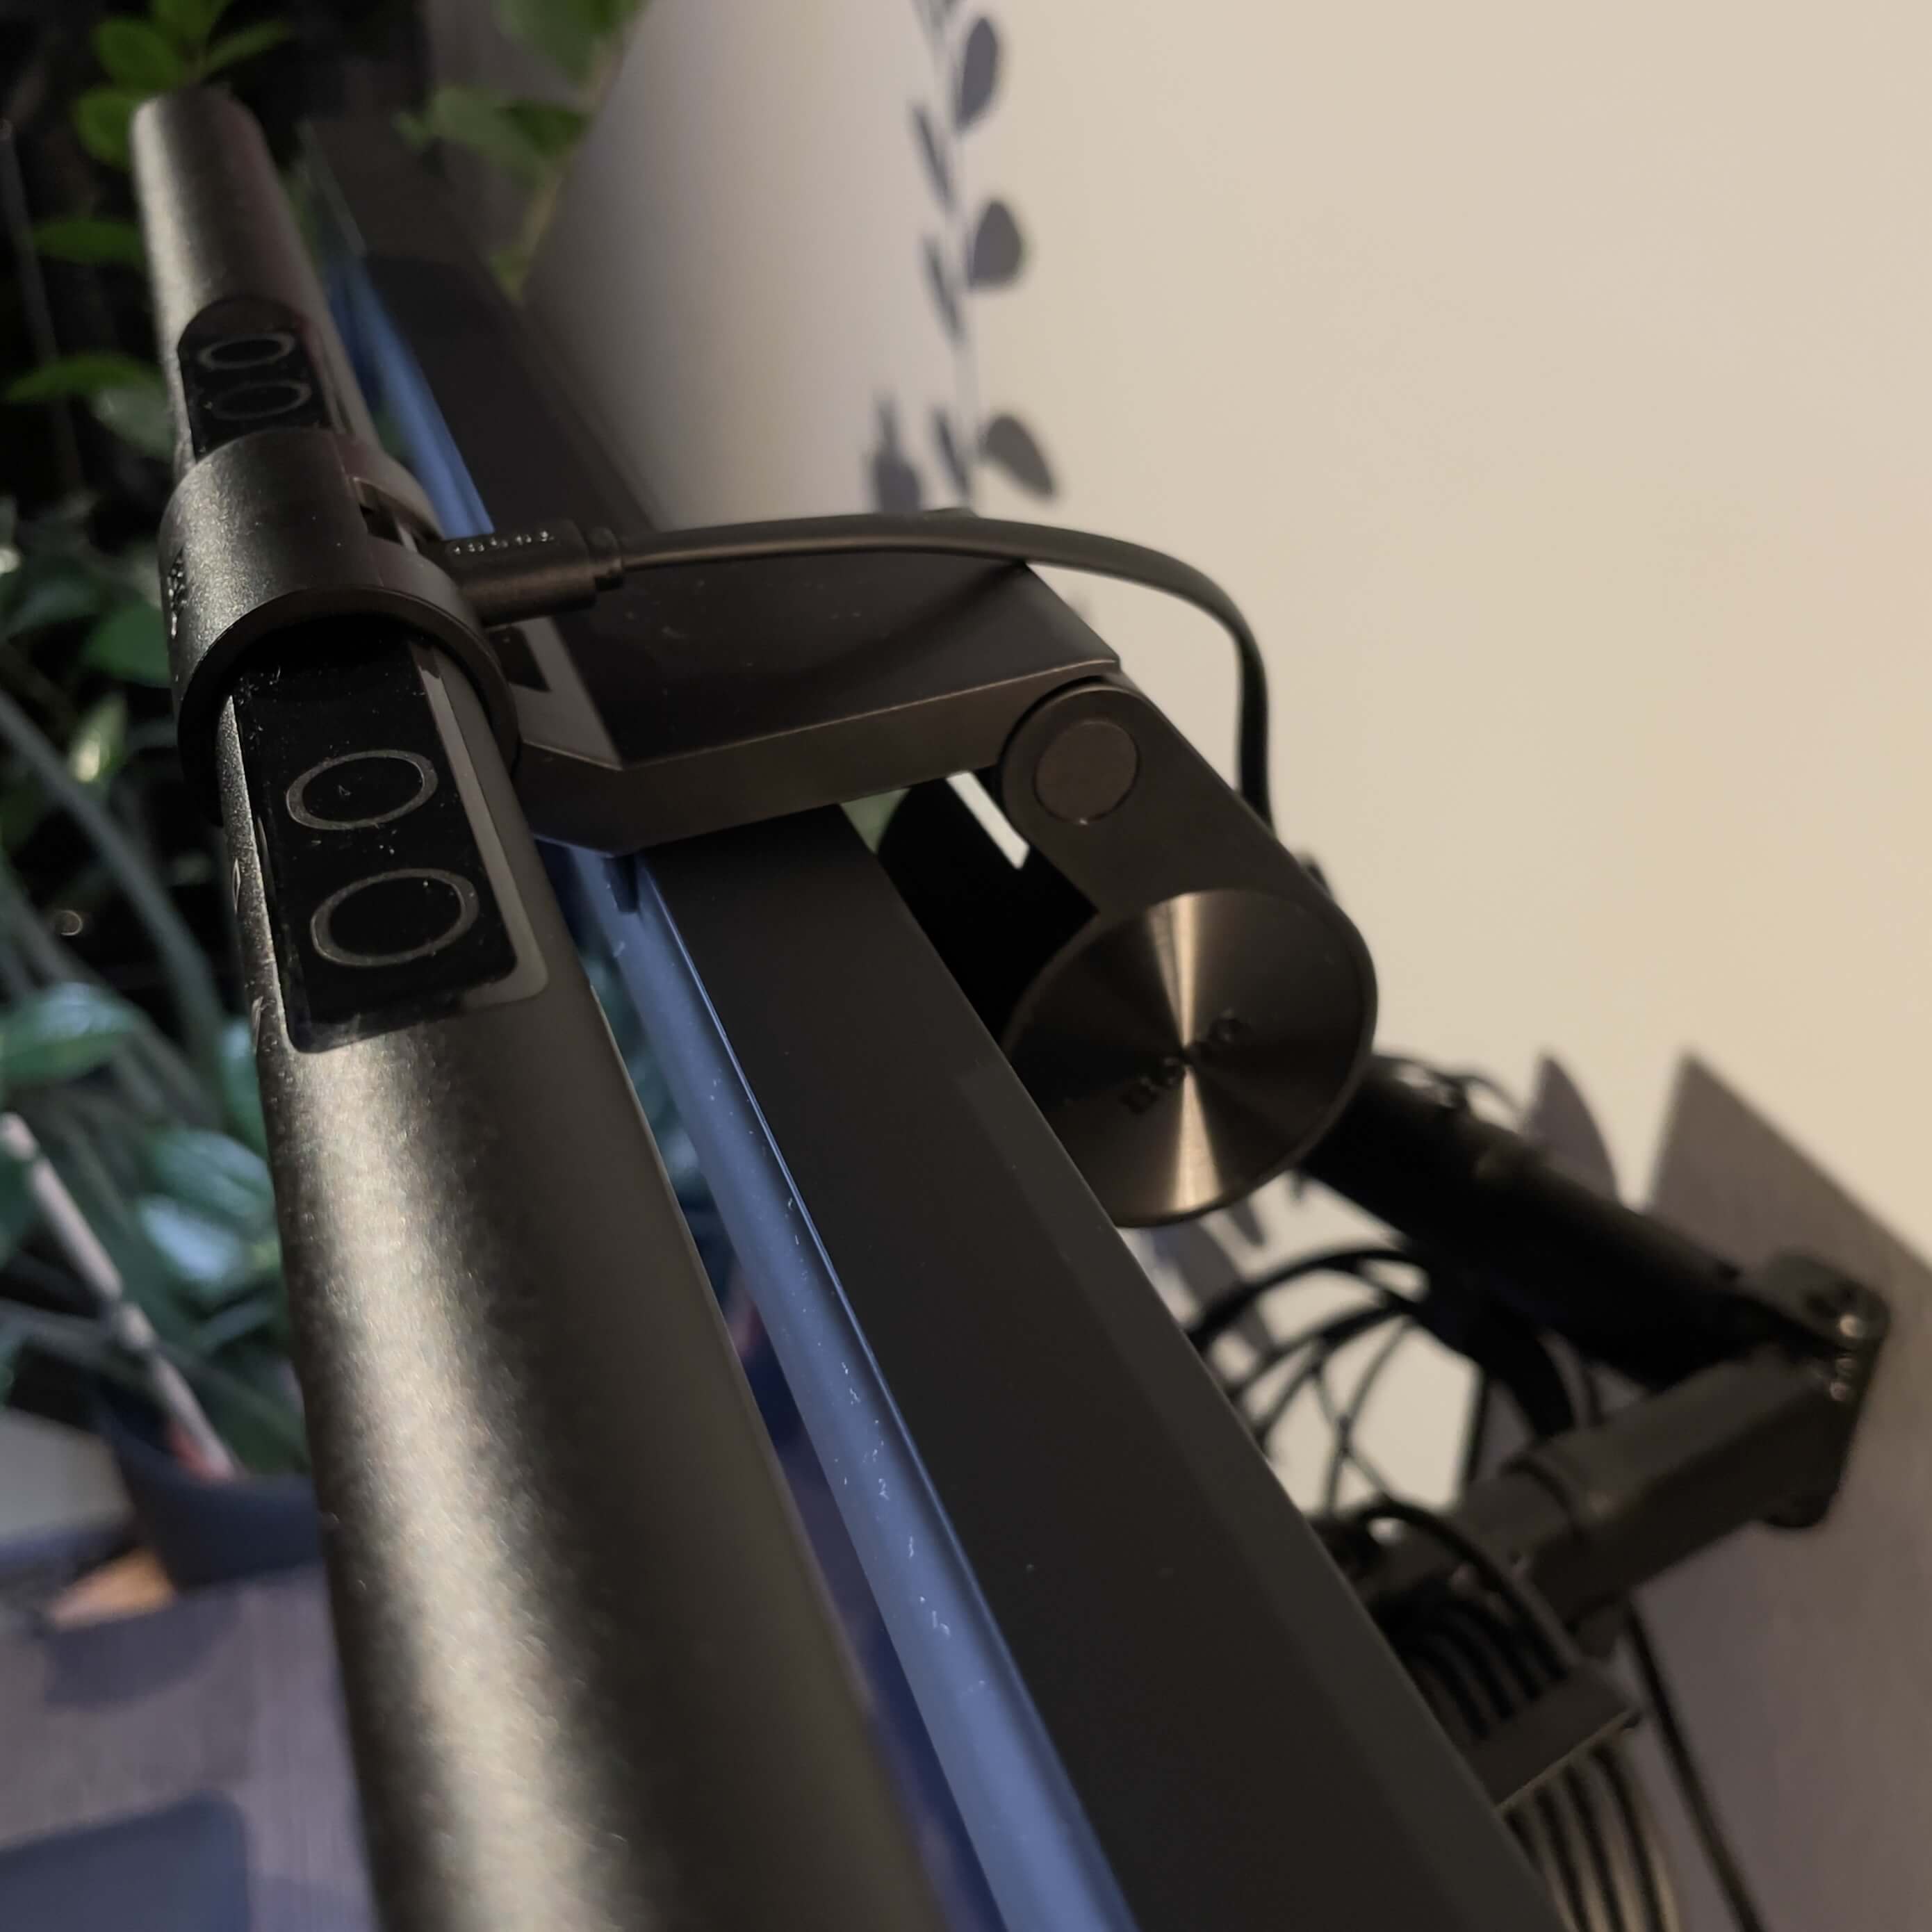 Photo showing the lamp resting on a monitor. The photo is taken from aboth, so to see how the counterweight rests on the back side of the monitor. Other cables are also shown on the photograph. A couple of green leaves can be seen in the background.